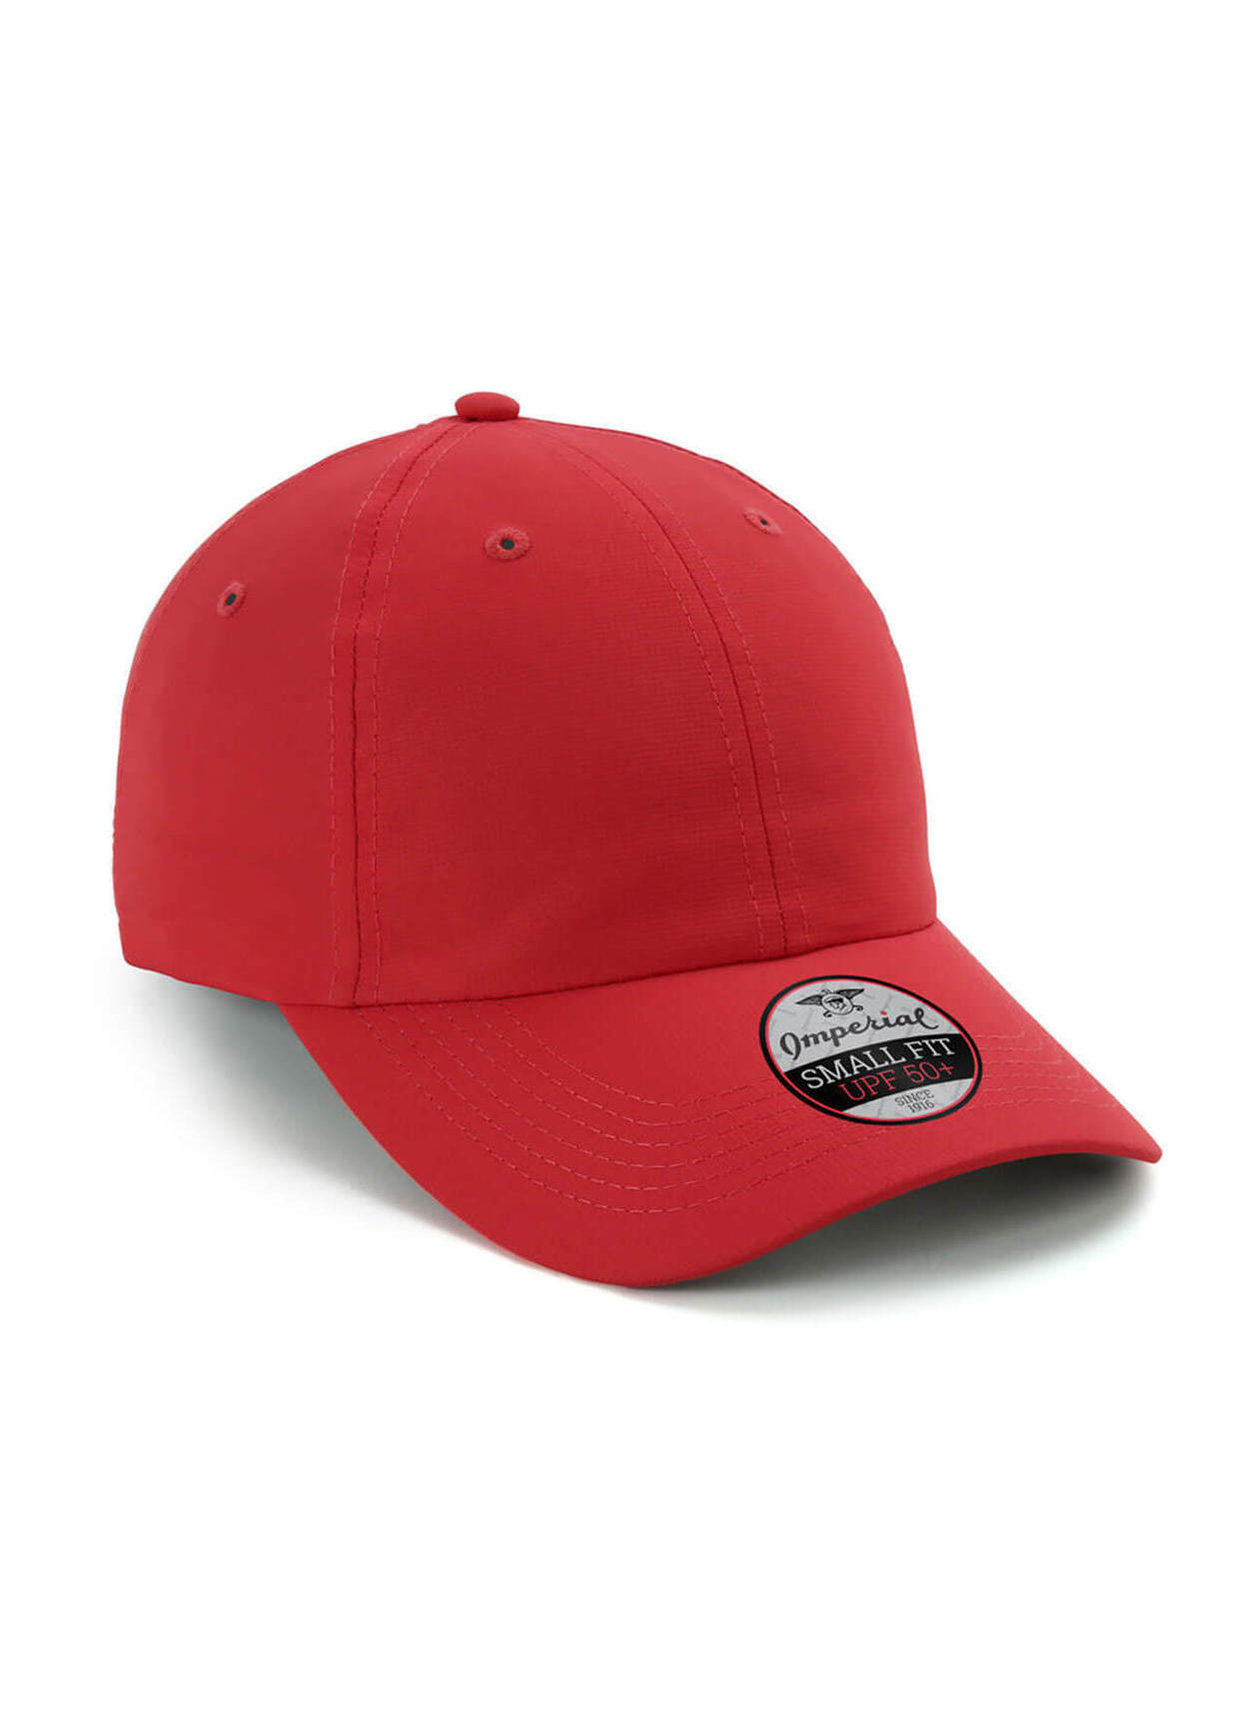 Imperial Nantucket Red Original Small Fit Performance Hat